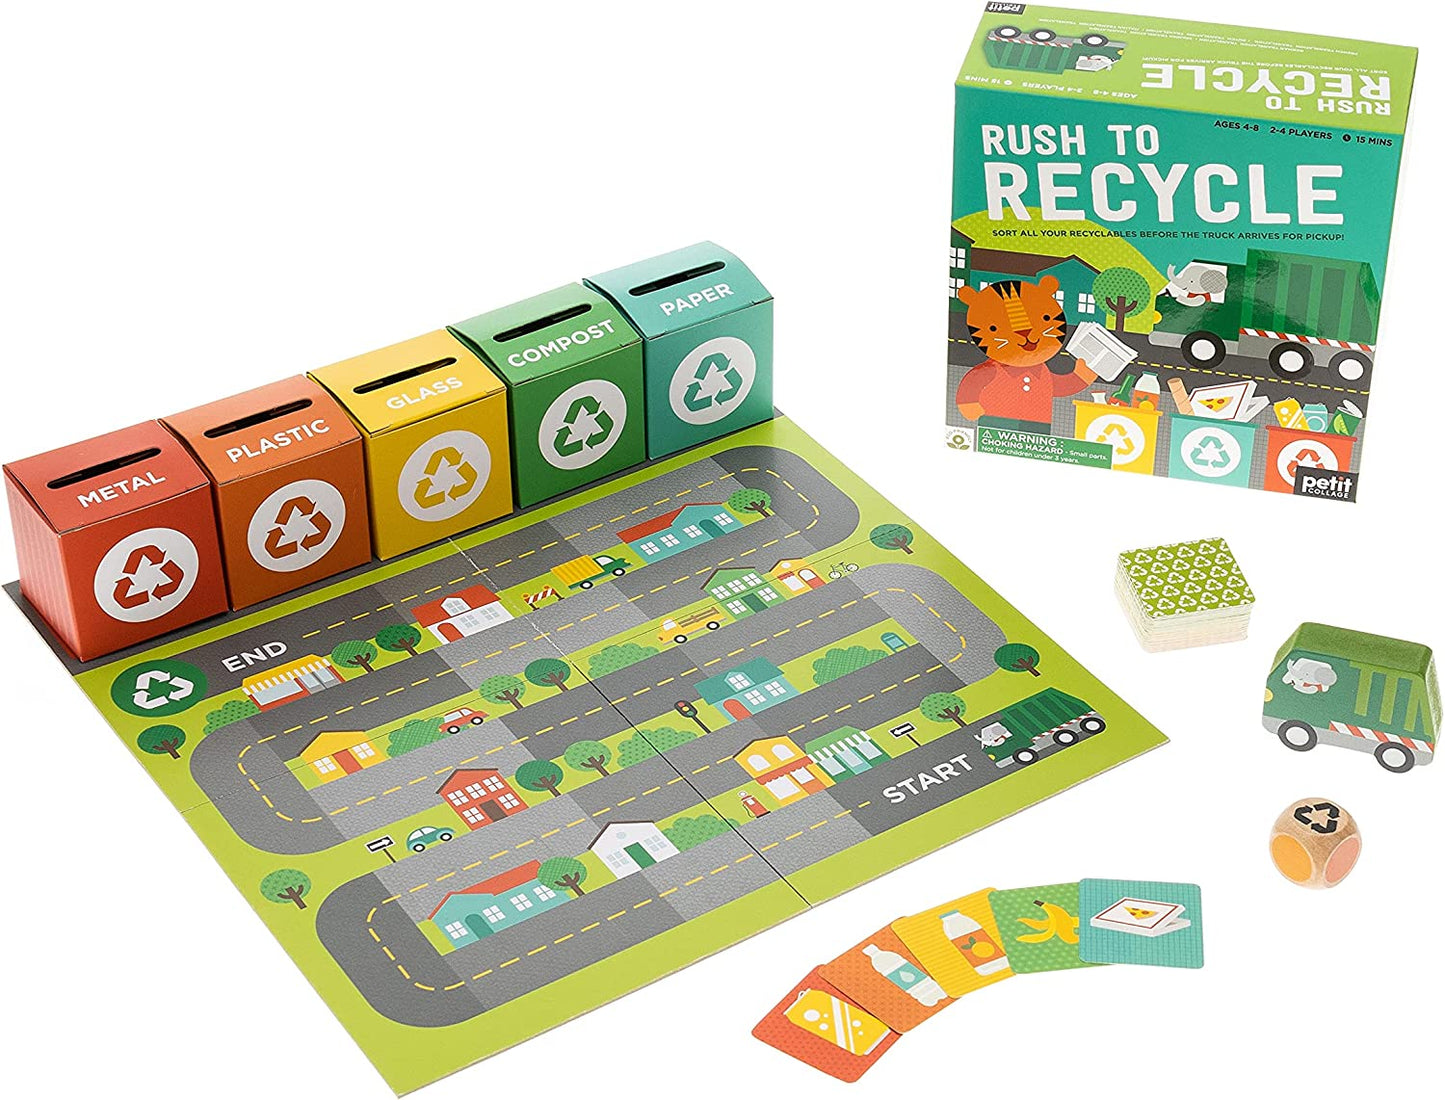 Rush to Recycle Board Game